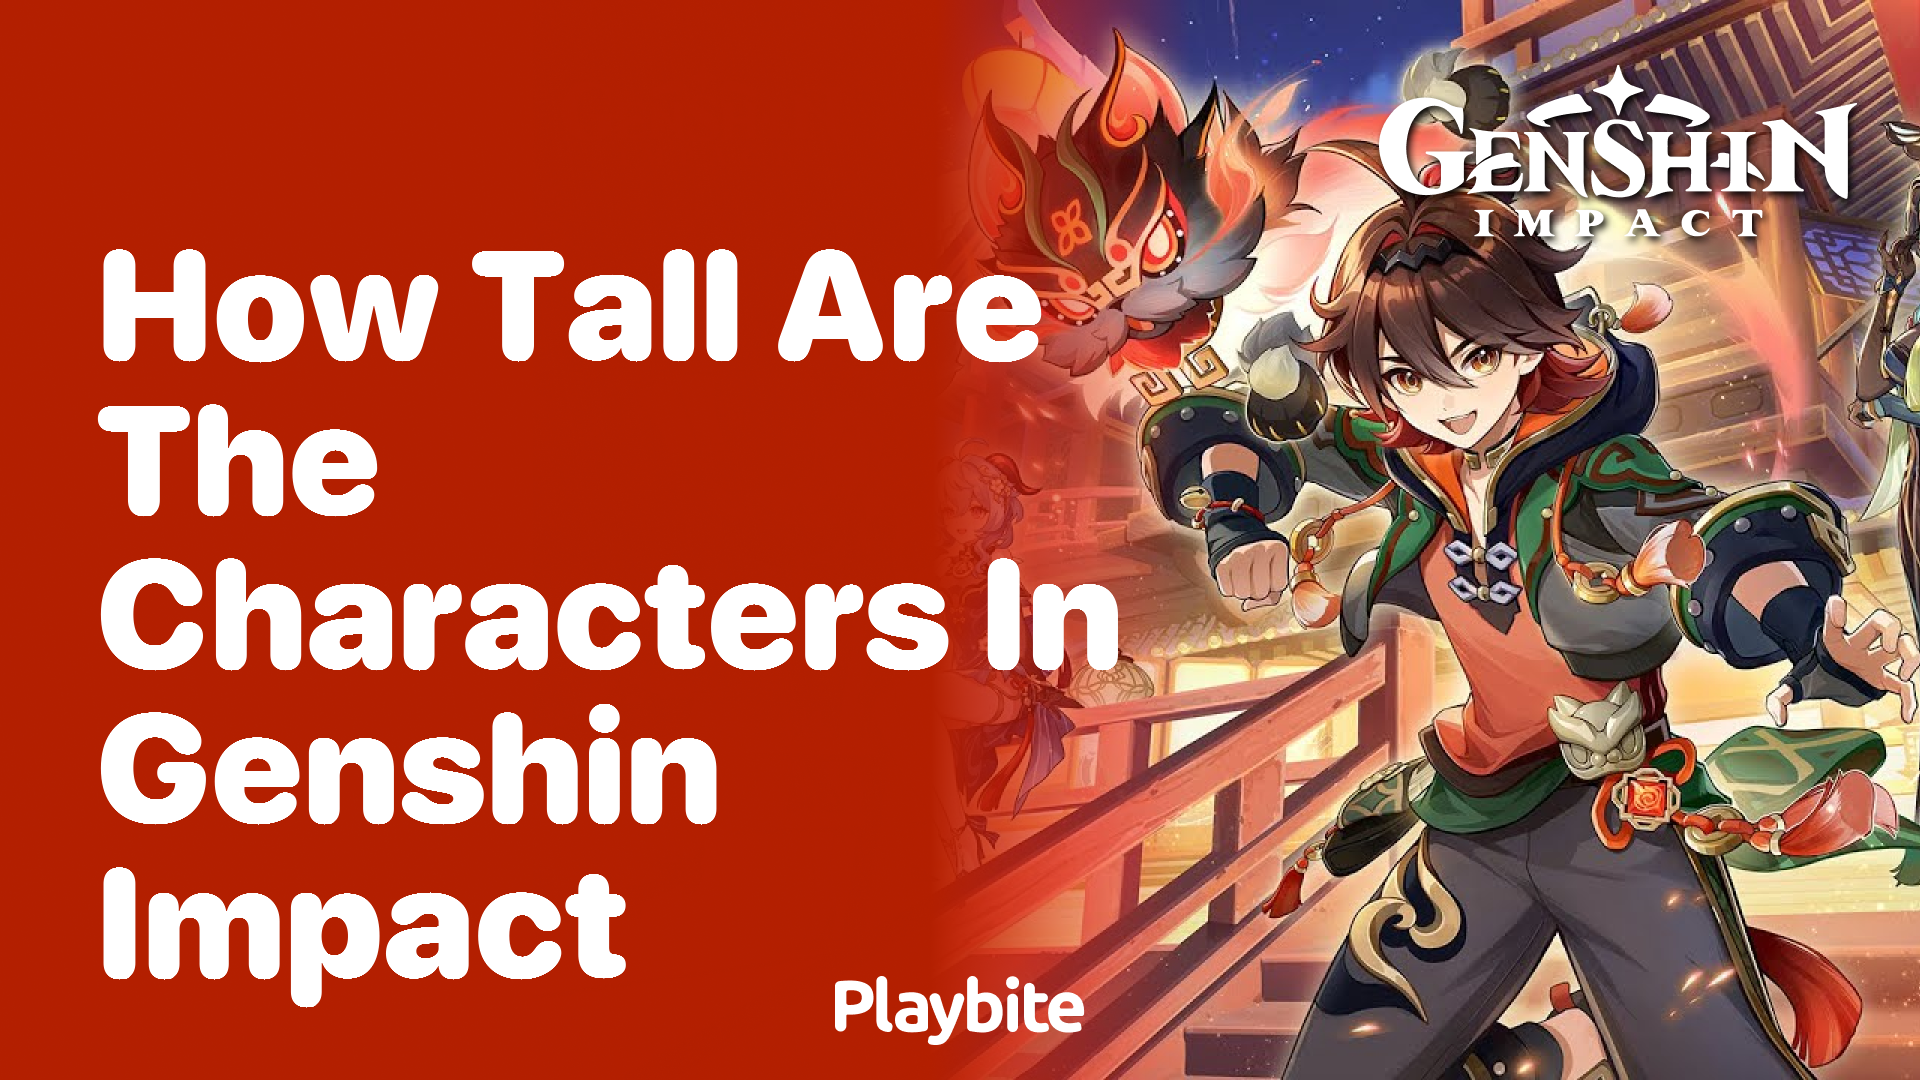 How Tall Are the Characters in Genshin Impact?